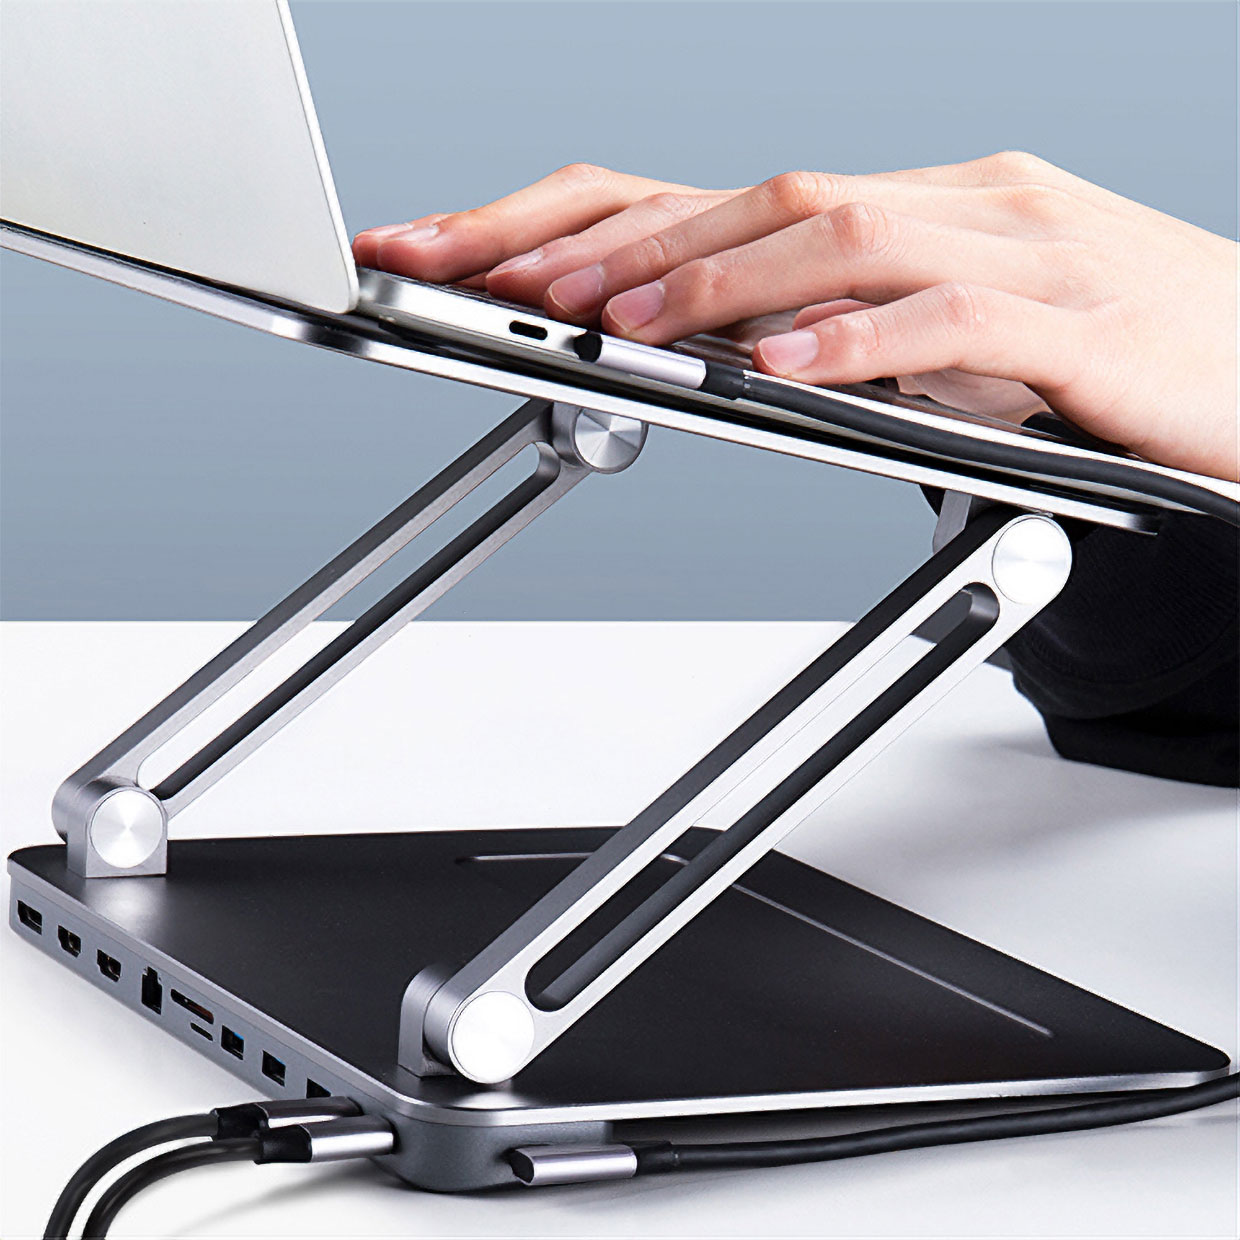 13-in-1 Laptop Riser and Dock